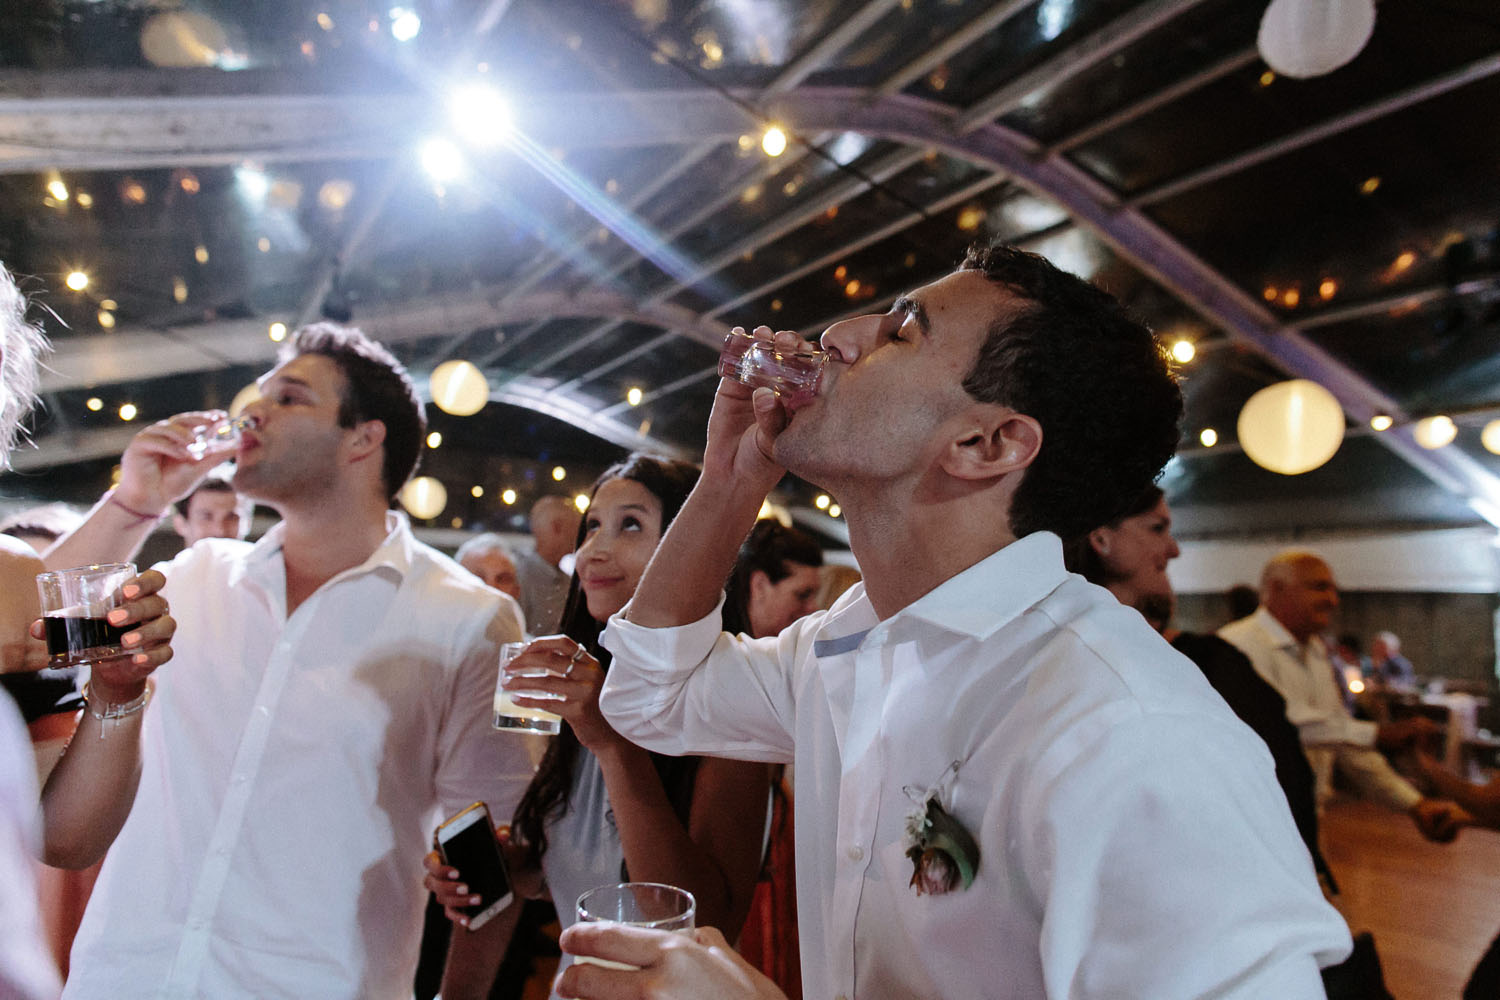 wedding guests do alcohol shots